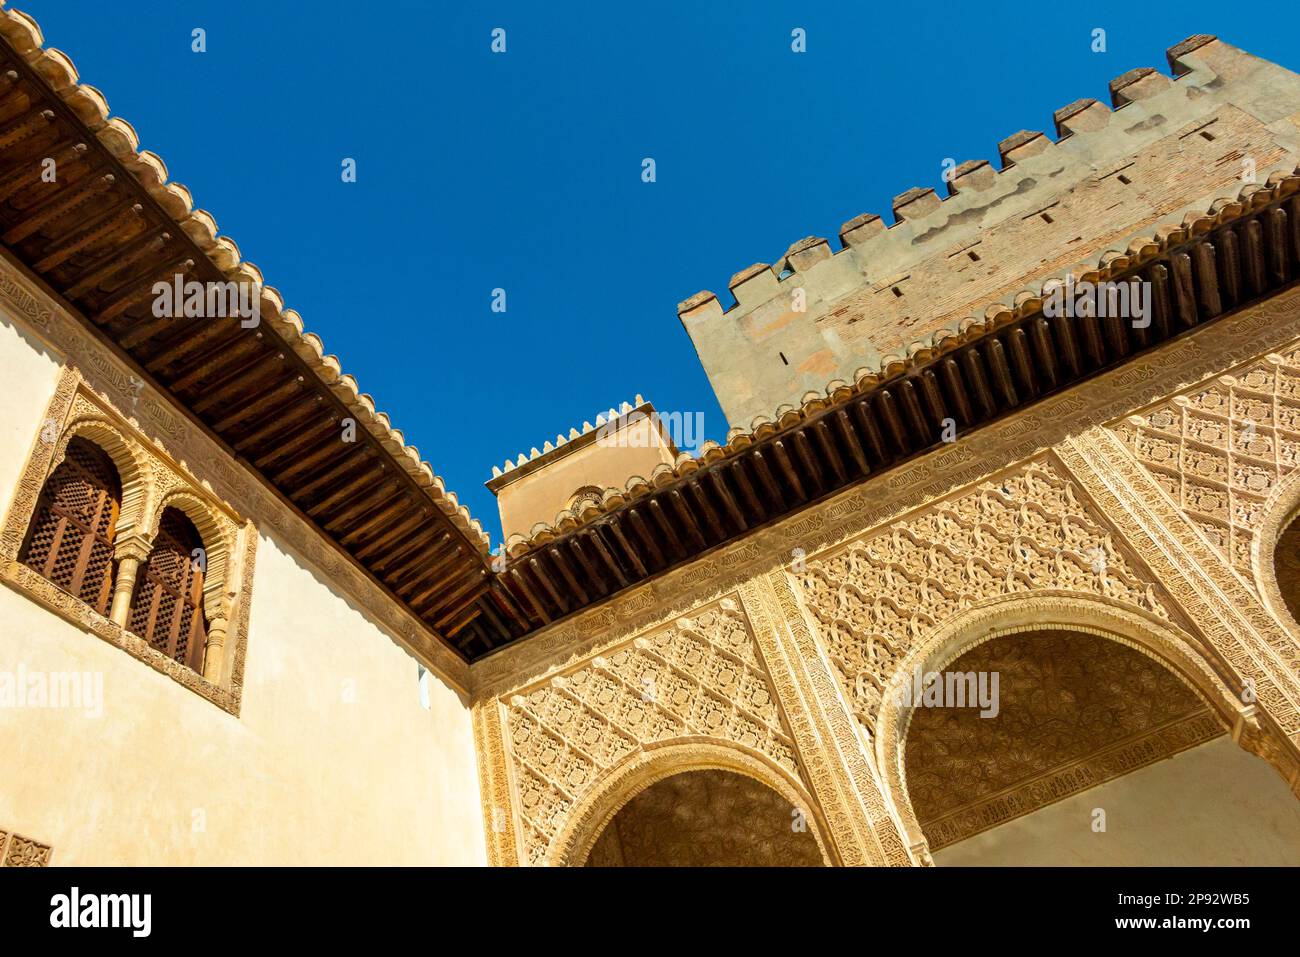 Islamic decorations in the Alhambra Palace in Granada Andalucia Spain a UNESCO World Heritage Site and major tourist attraction. Stock Photo